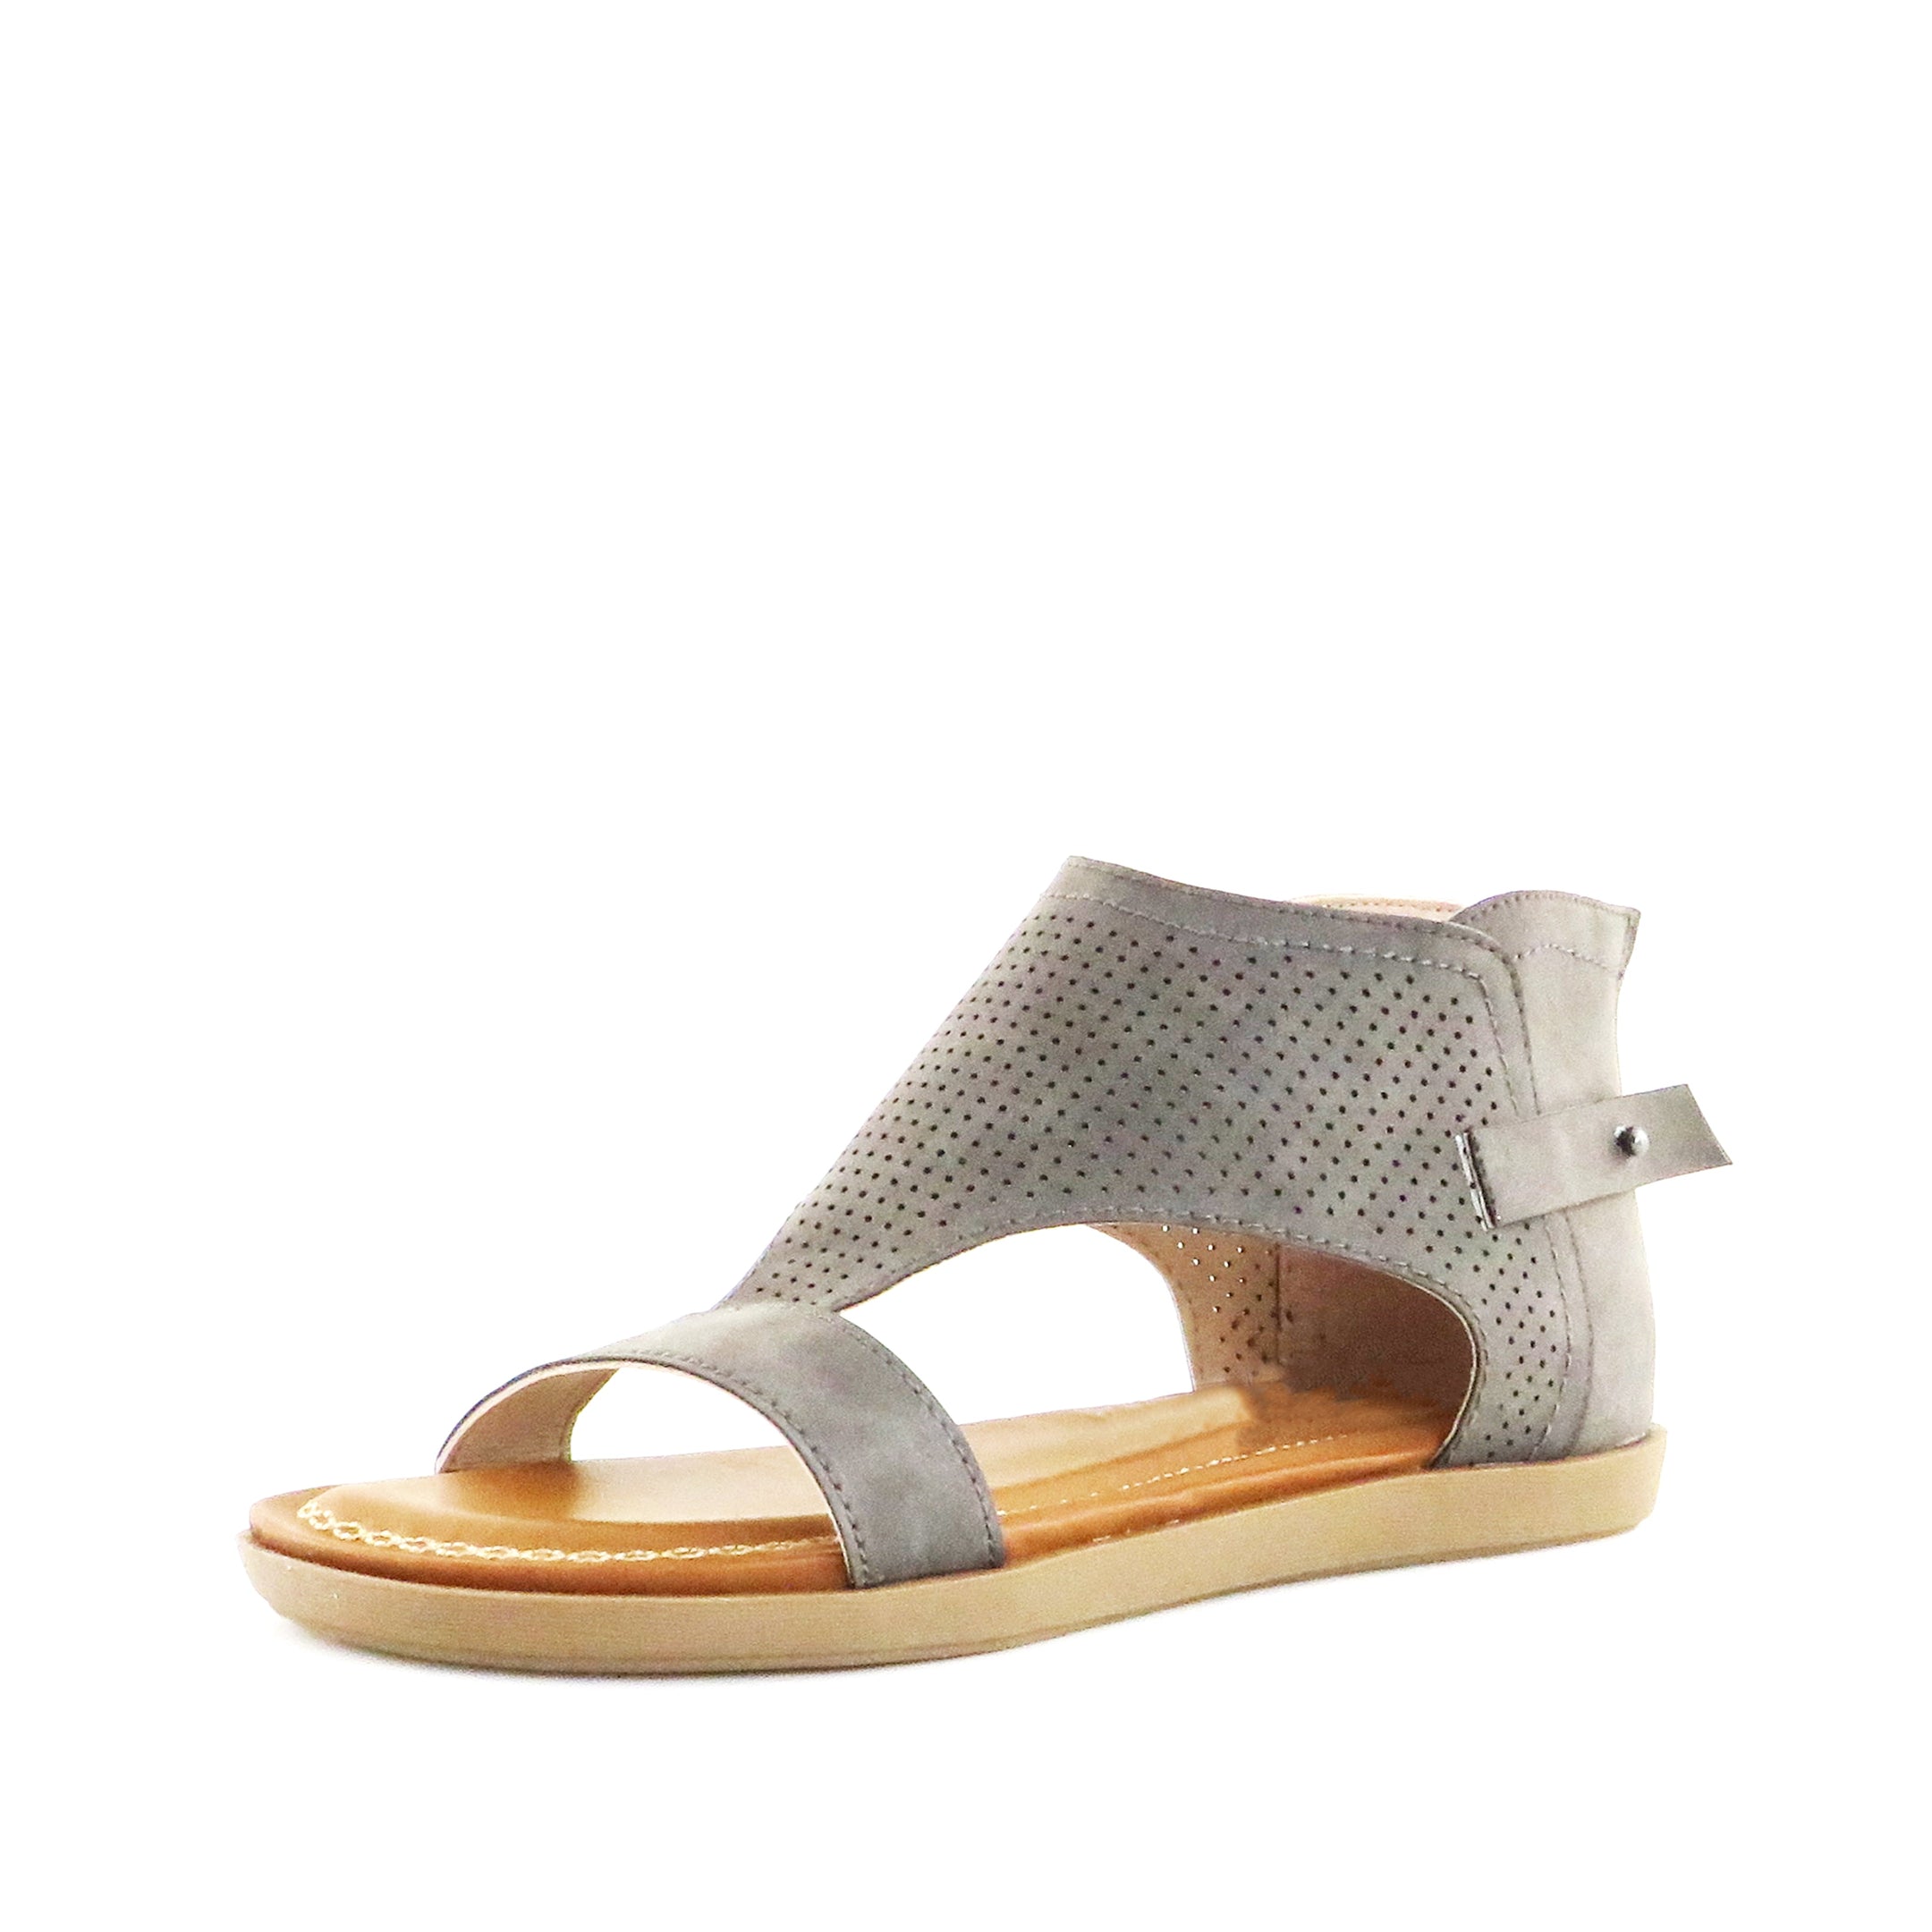 Women's Coop Slate Perforated Sandal